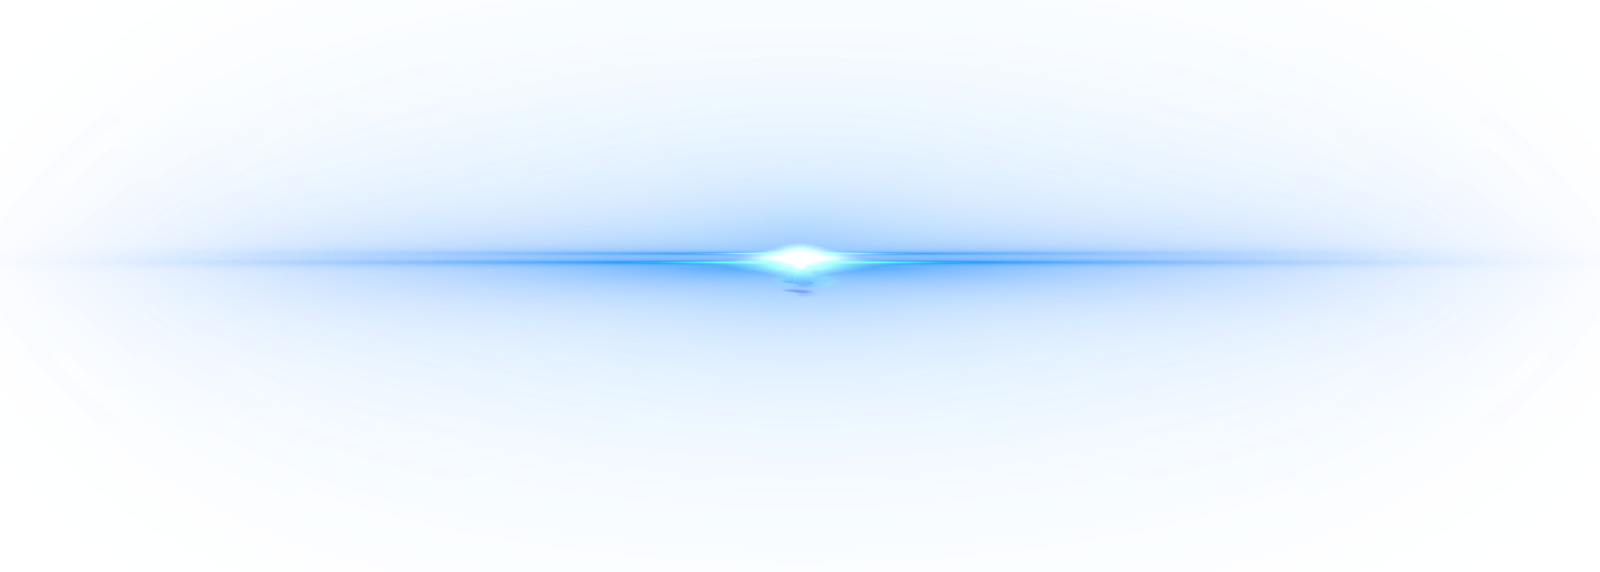 Abstract Blue Light Flare